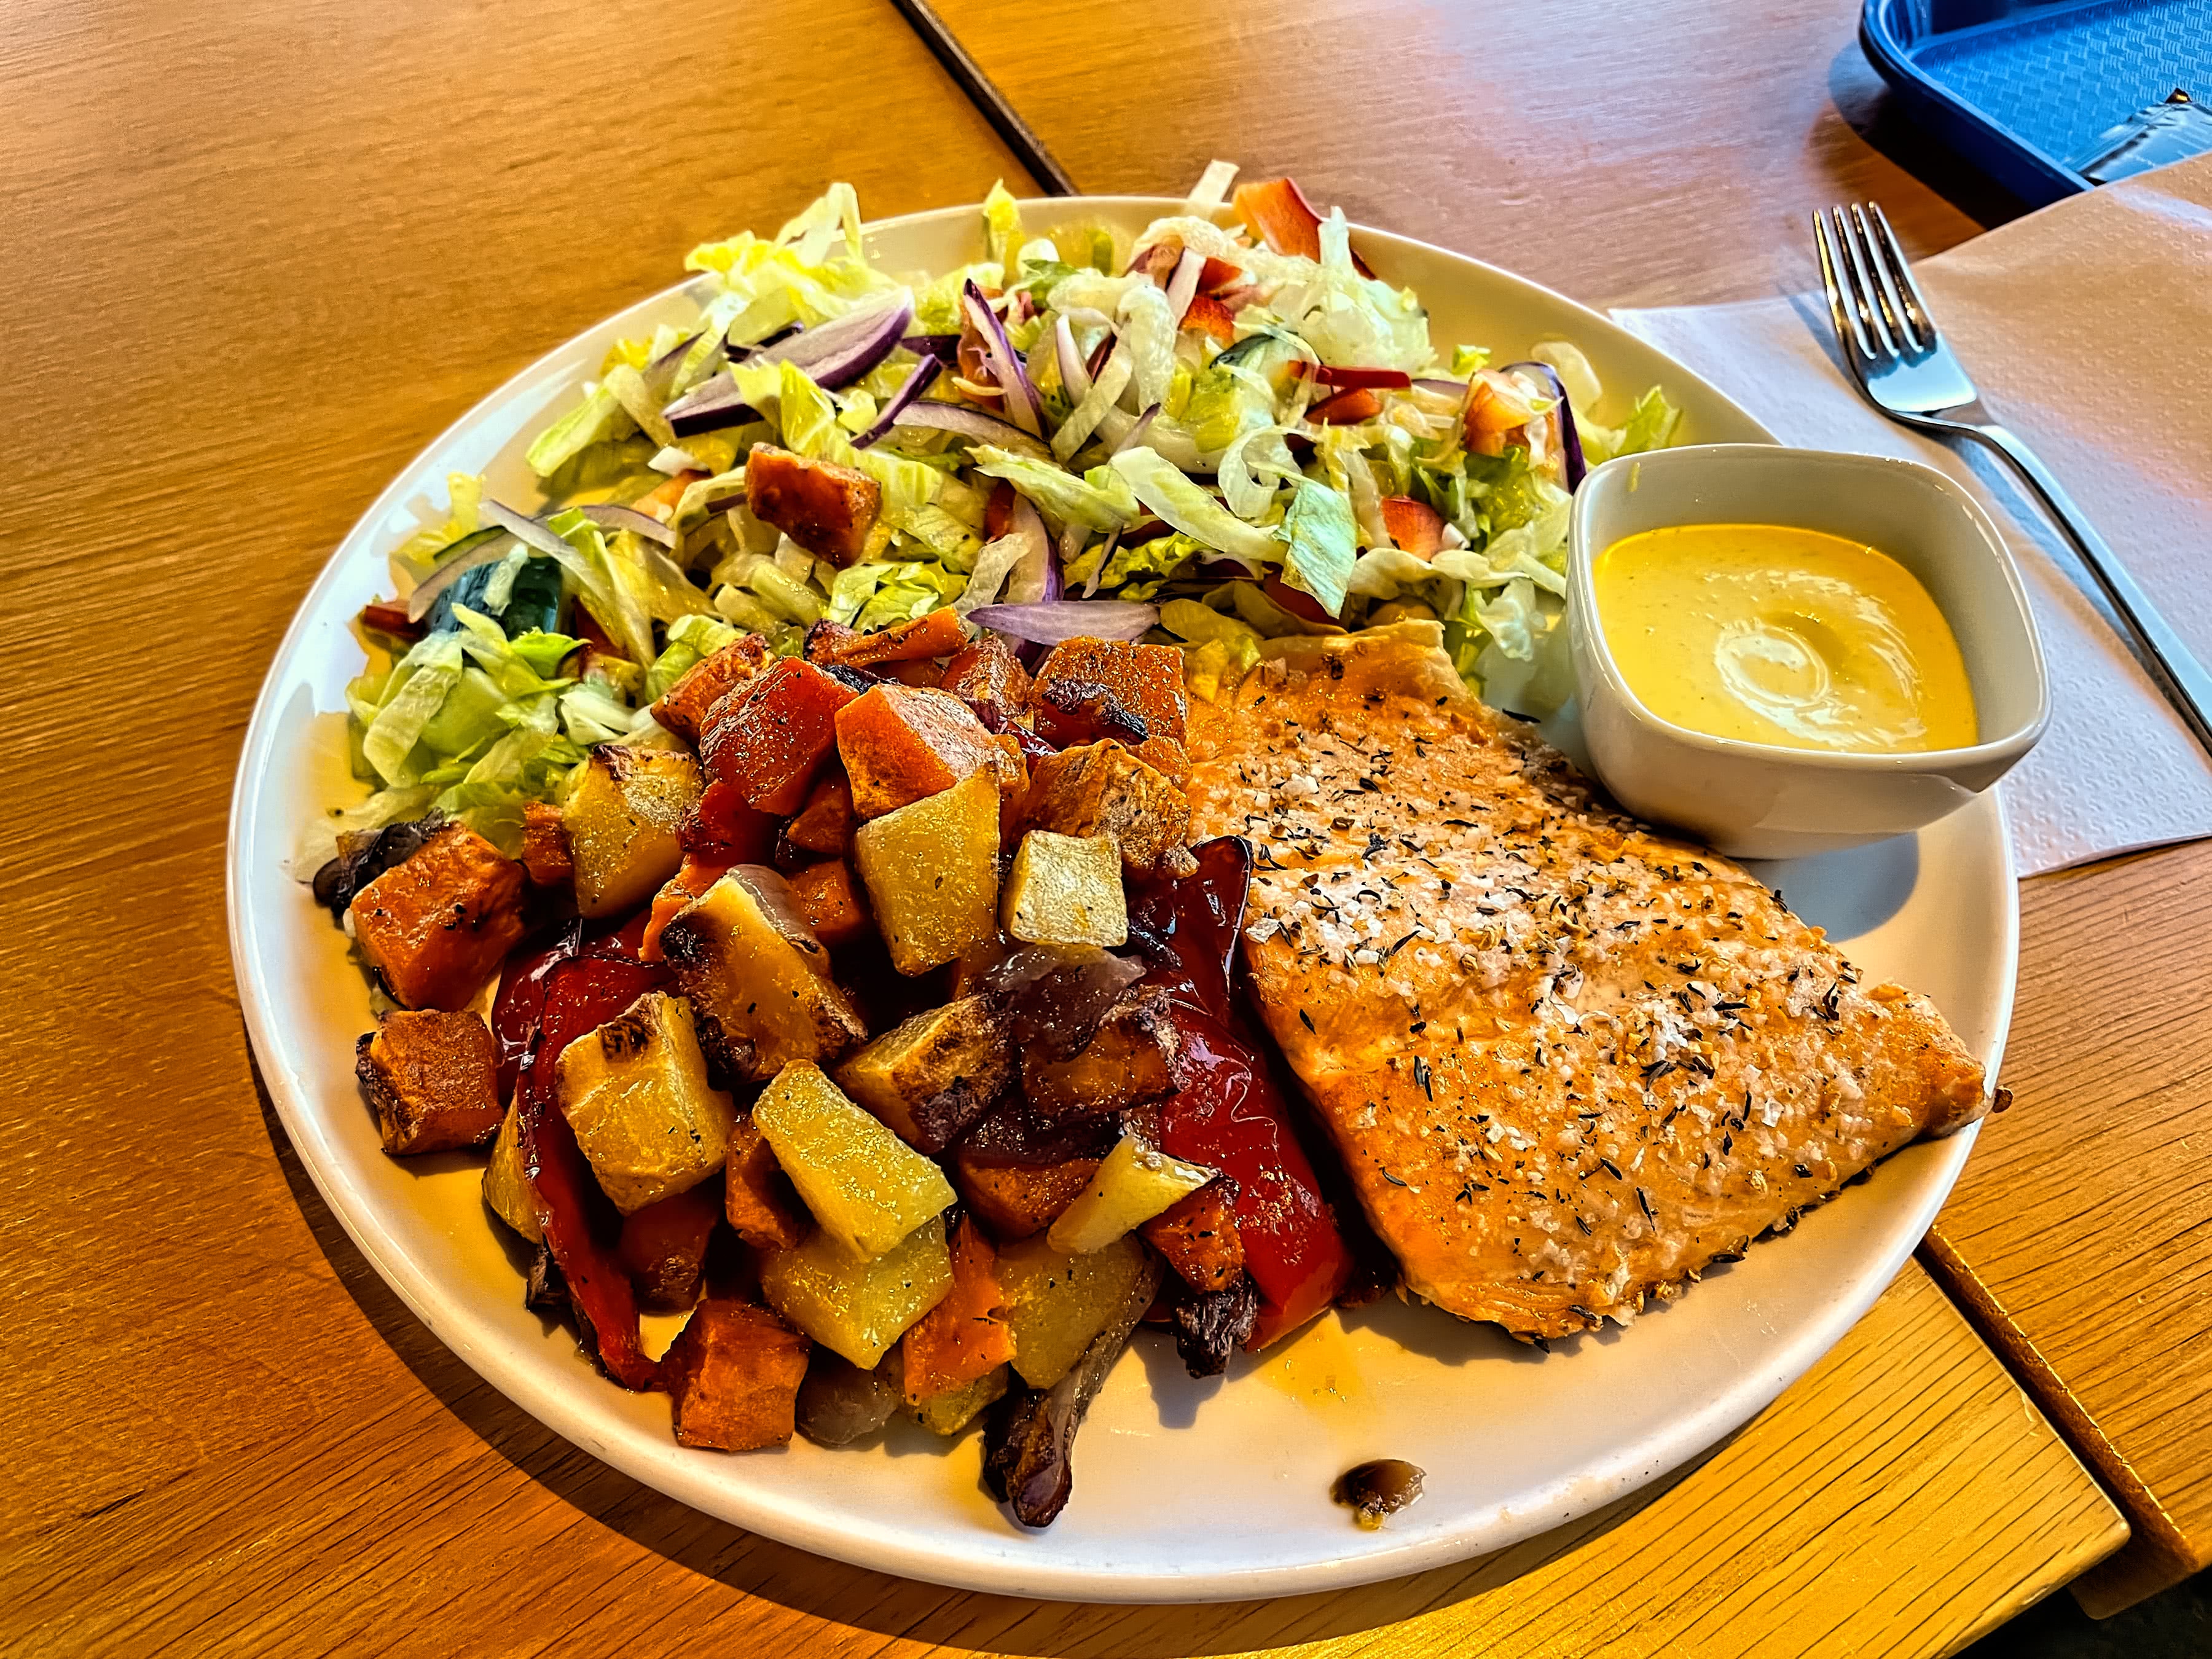 So Much Food at the Gullfoss Restaurant